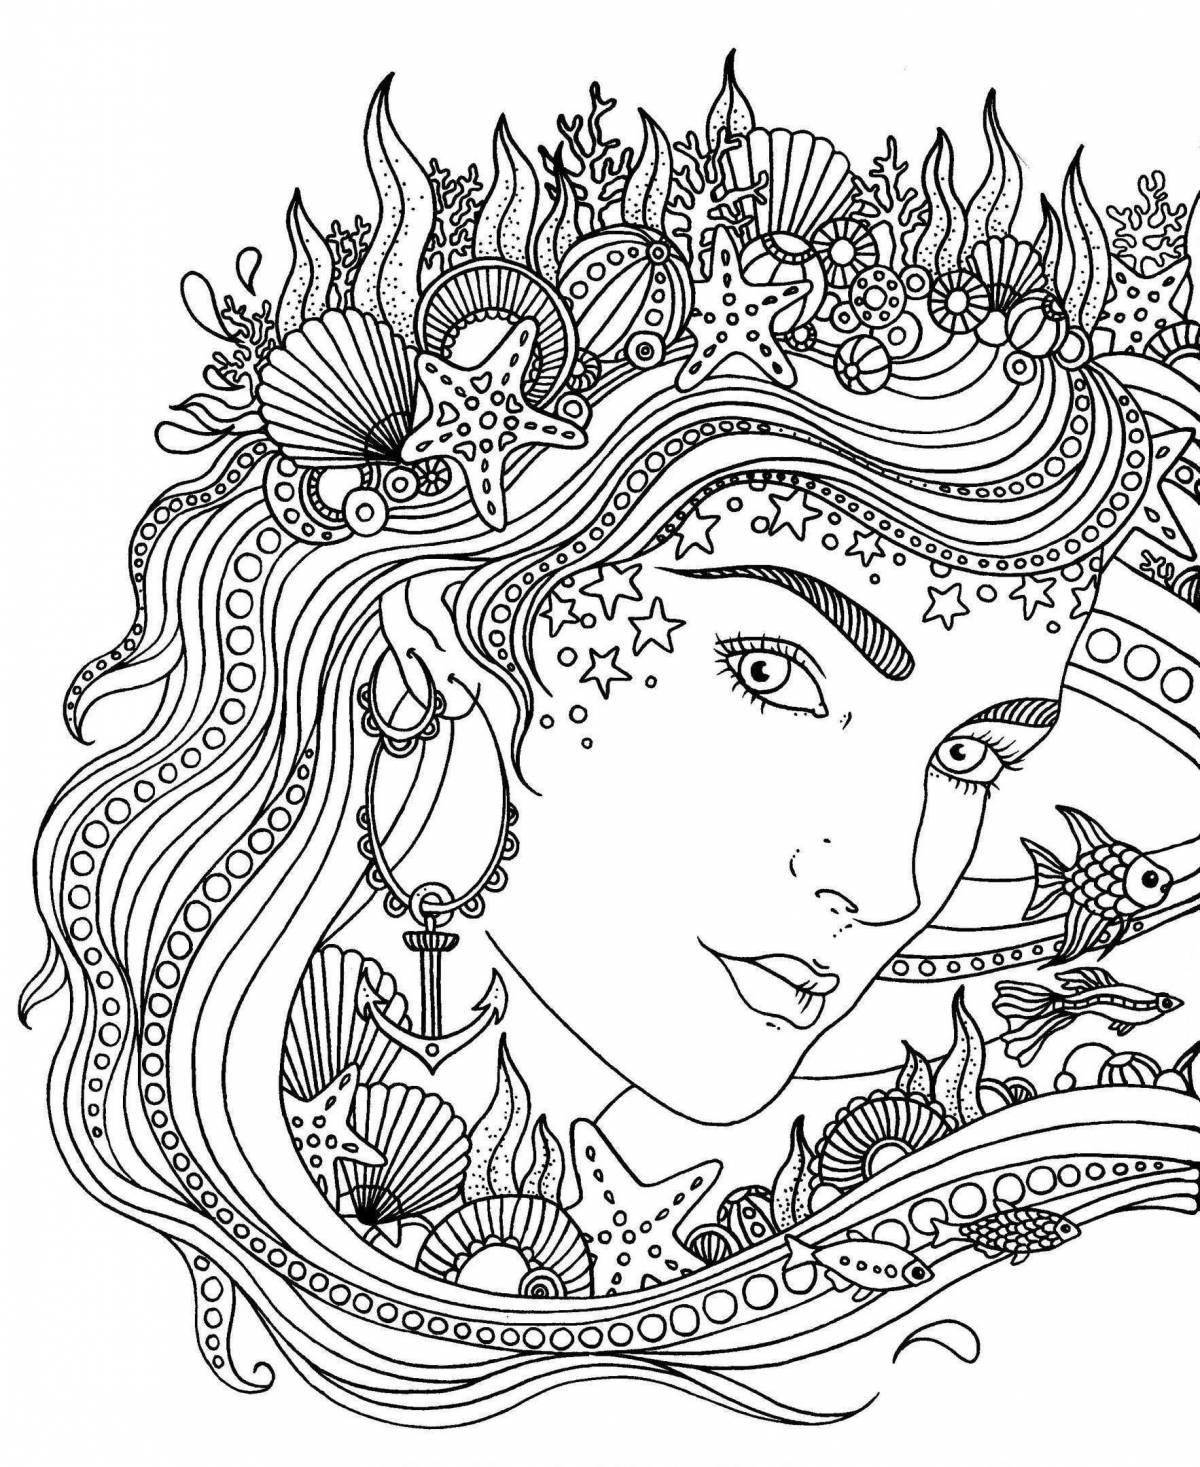 Inspirational anti-stress coloring book for women